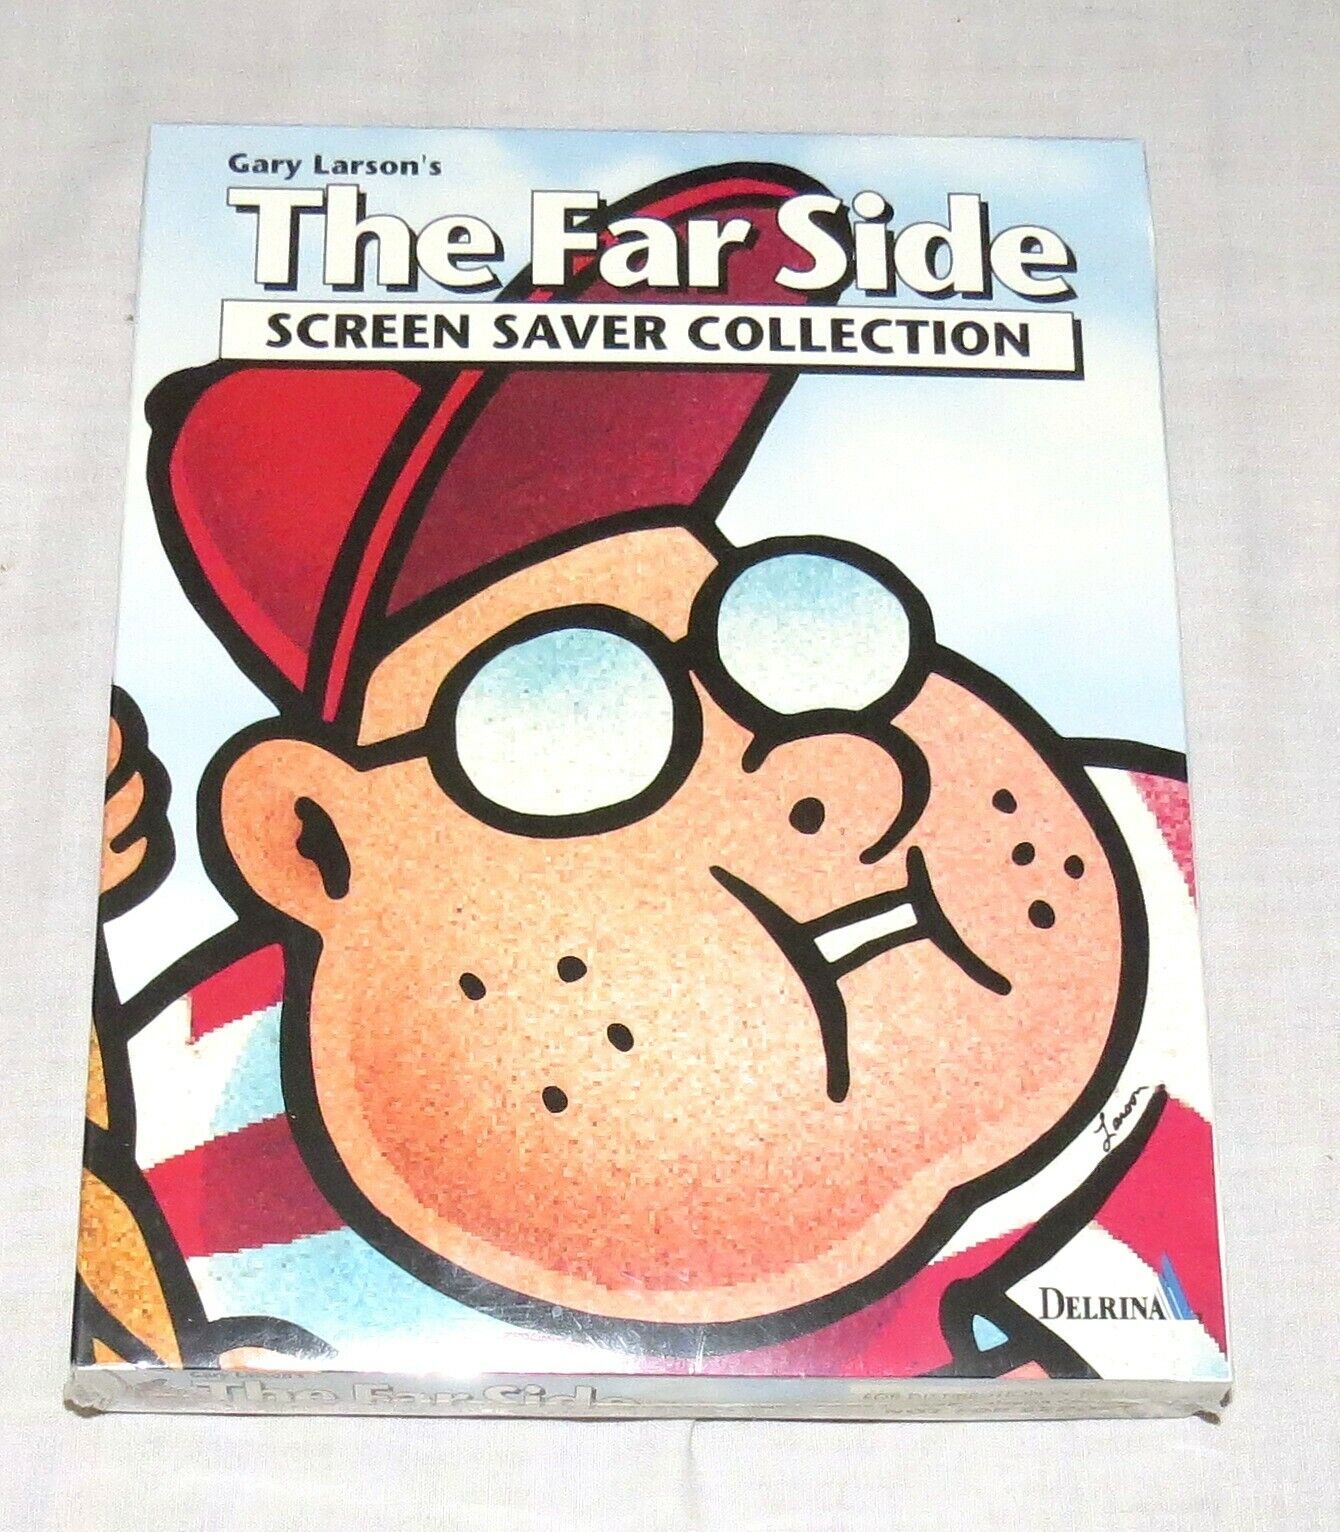 The Far Side Screen Saver Collection - Gary Larson - Delrina - NEW Sealed 1994